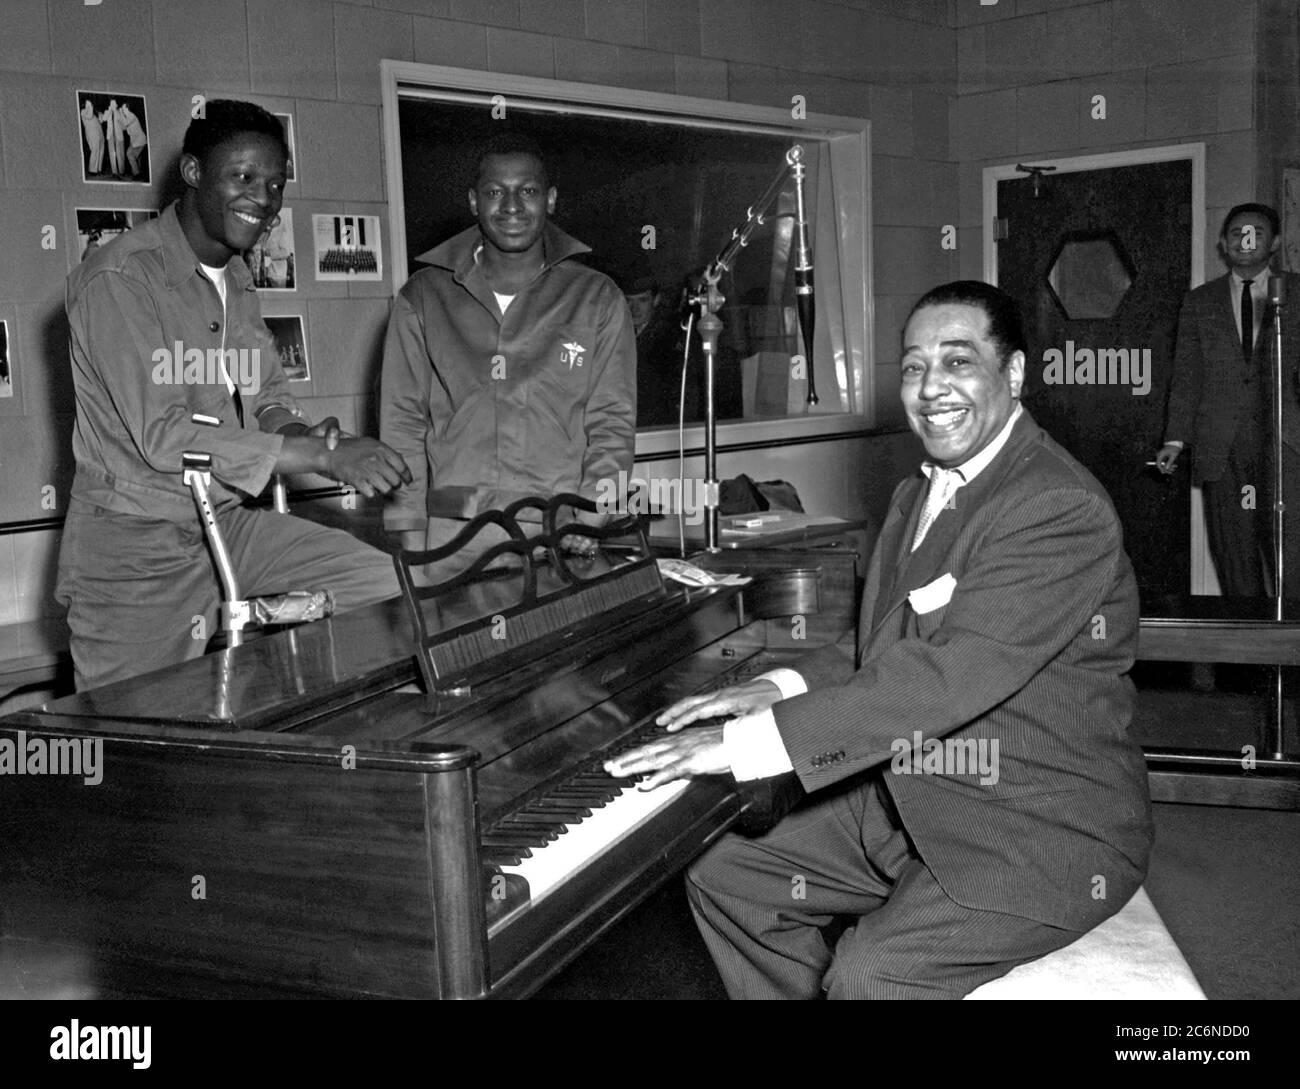 Jazz pianist Duke Ellington poses Nov. 3, 1954, at the KFG Radio Studio for Fitzsimons Army Medical Center in Aurora, Colorado. Ellington played three shows at Travis Air Force Base, California, in the 1950s and 1960s, one of which was released as a live album in the 1980s.(U.S. Army photo) Stock Photo